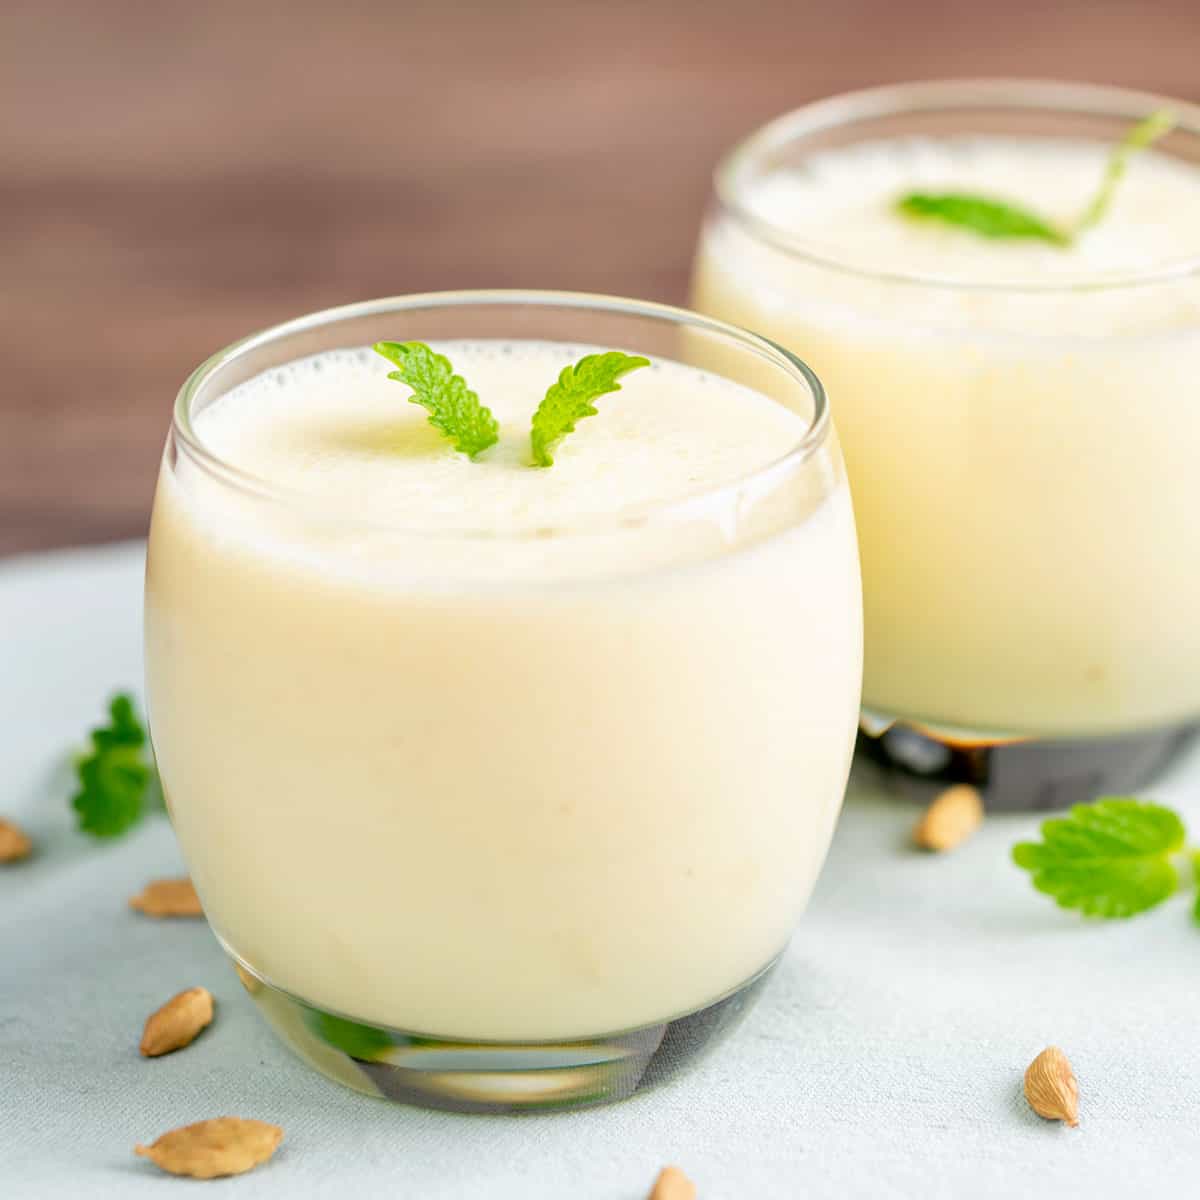 Easy And Authentic Indian Lassi Recipes You Ll Love The Mango Lassi